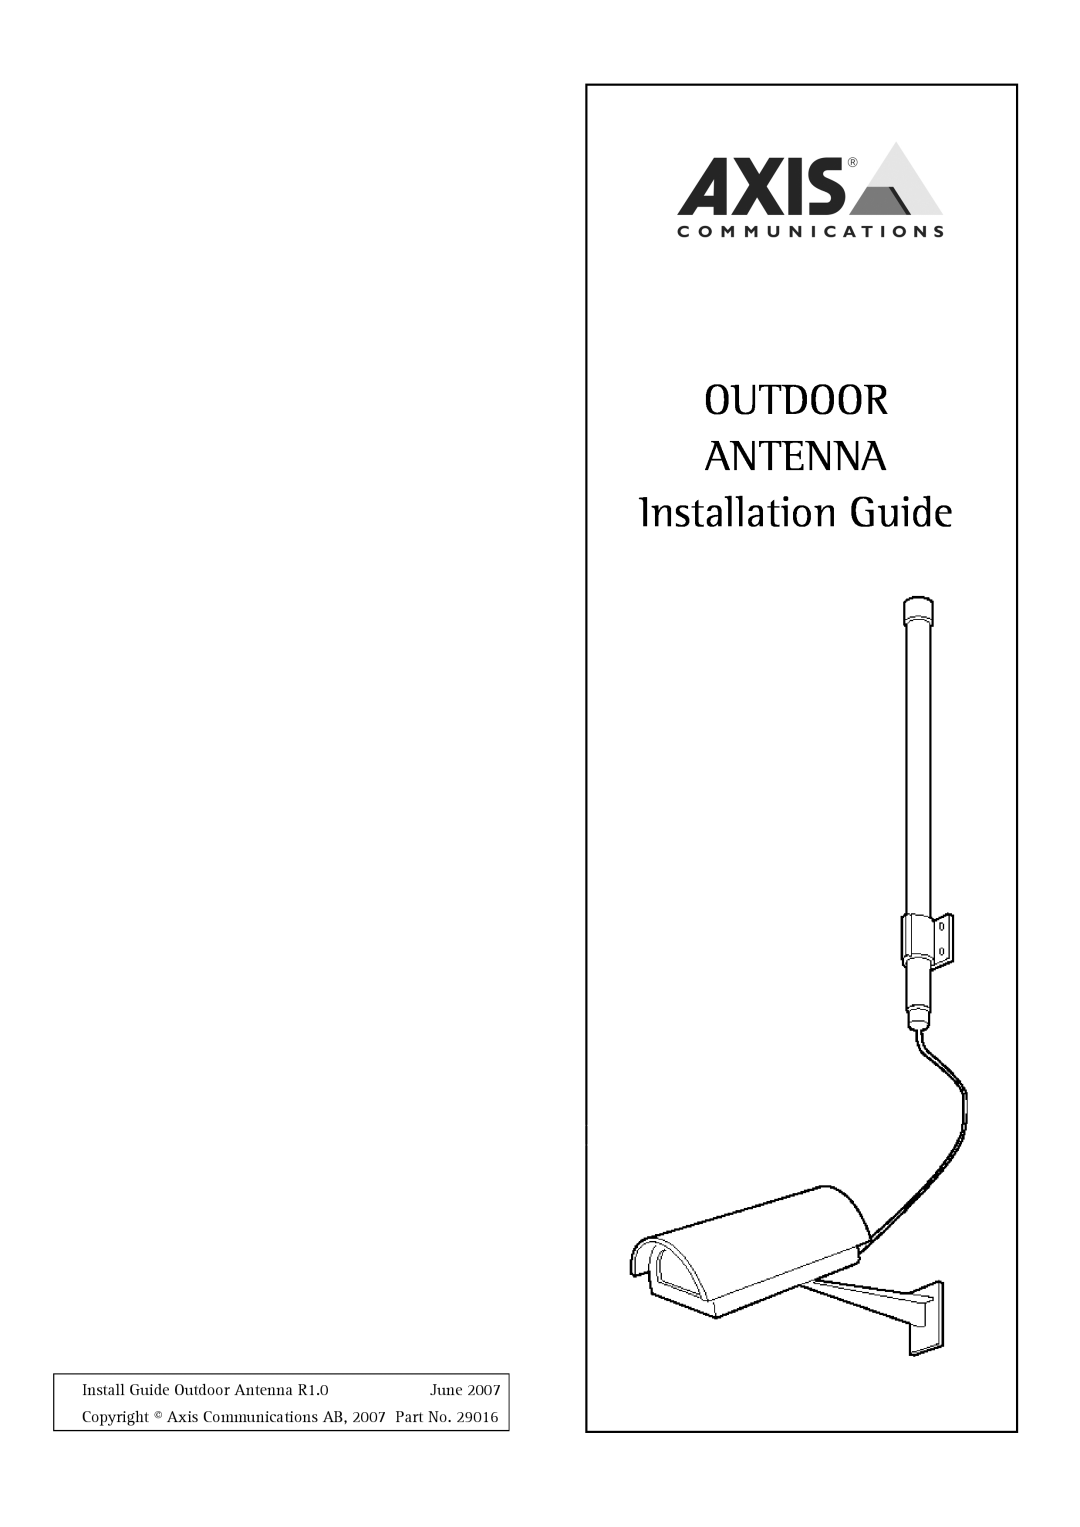 Axis Communications manual OUTDOOR ANTENNA Installation Guide, Install Guide Outdoor Antenna R1.0, June 